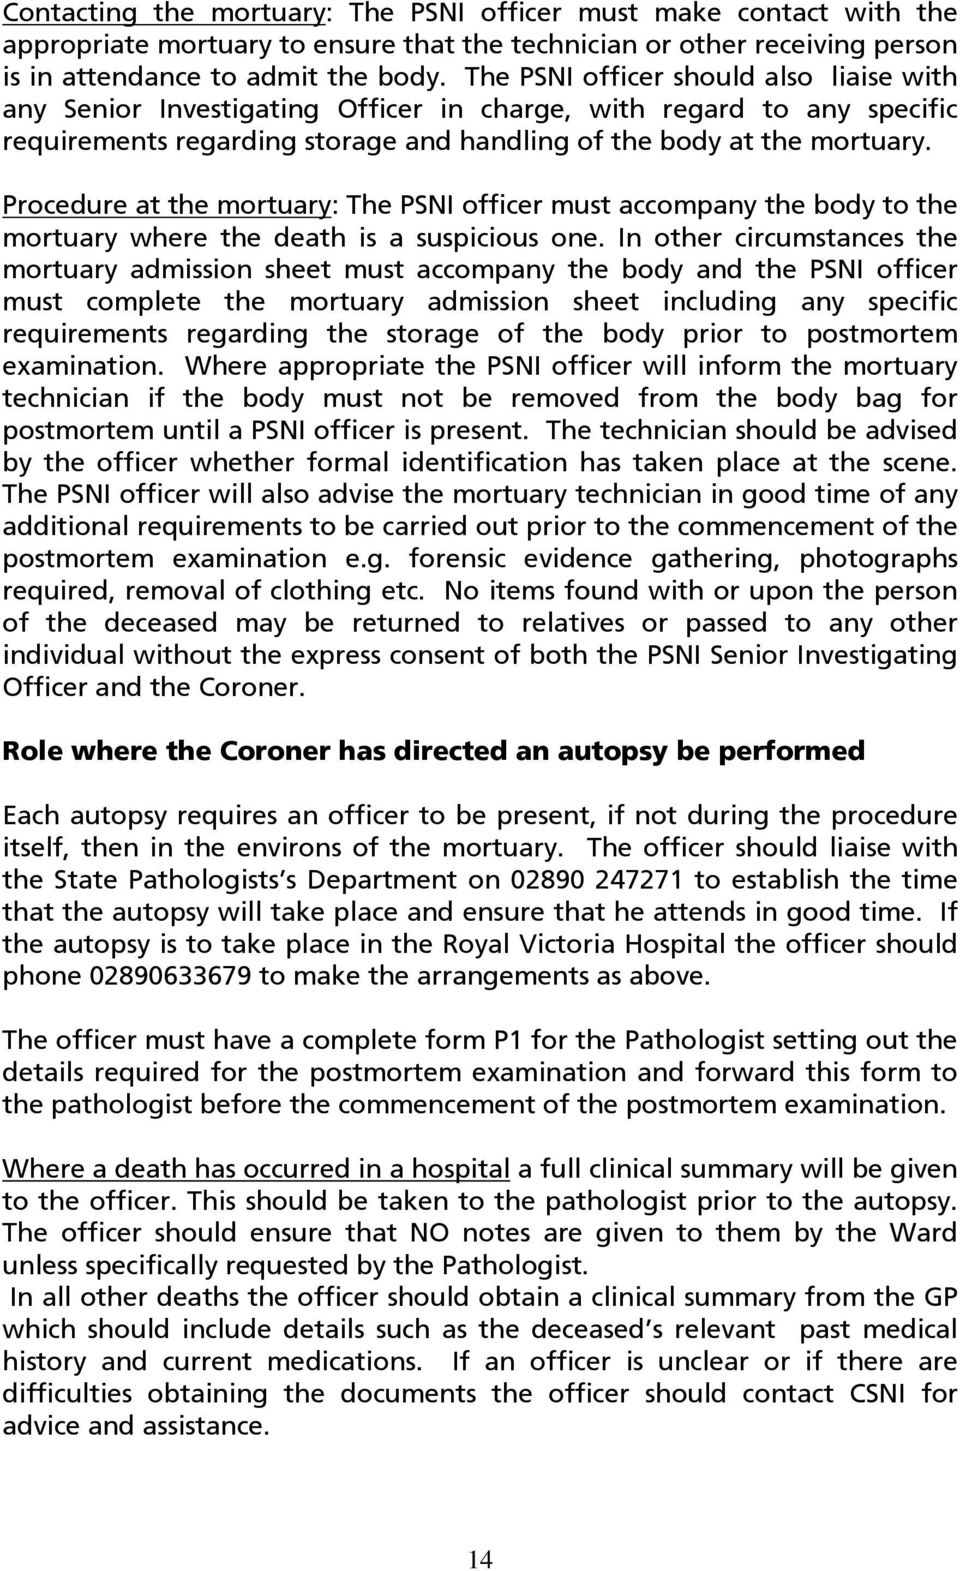 Procedure at the mortuary: The PSNI officer must accompany the body to the mortuary where the death is a suspicious one.